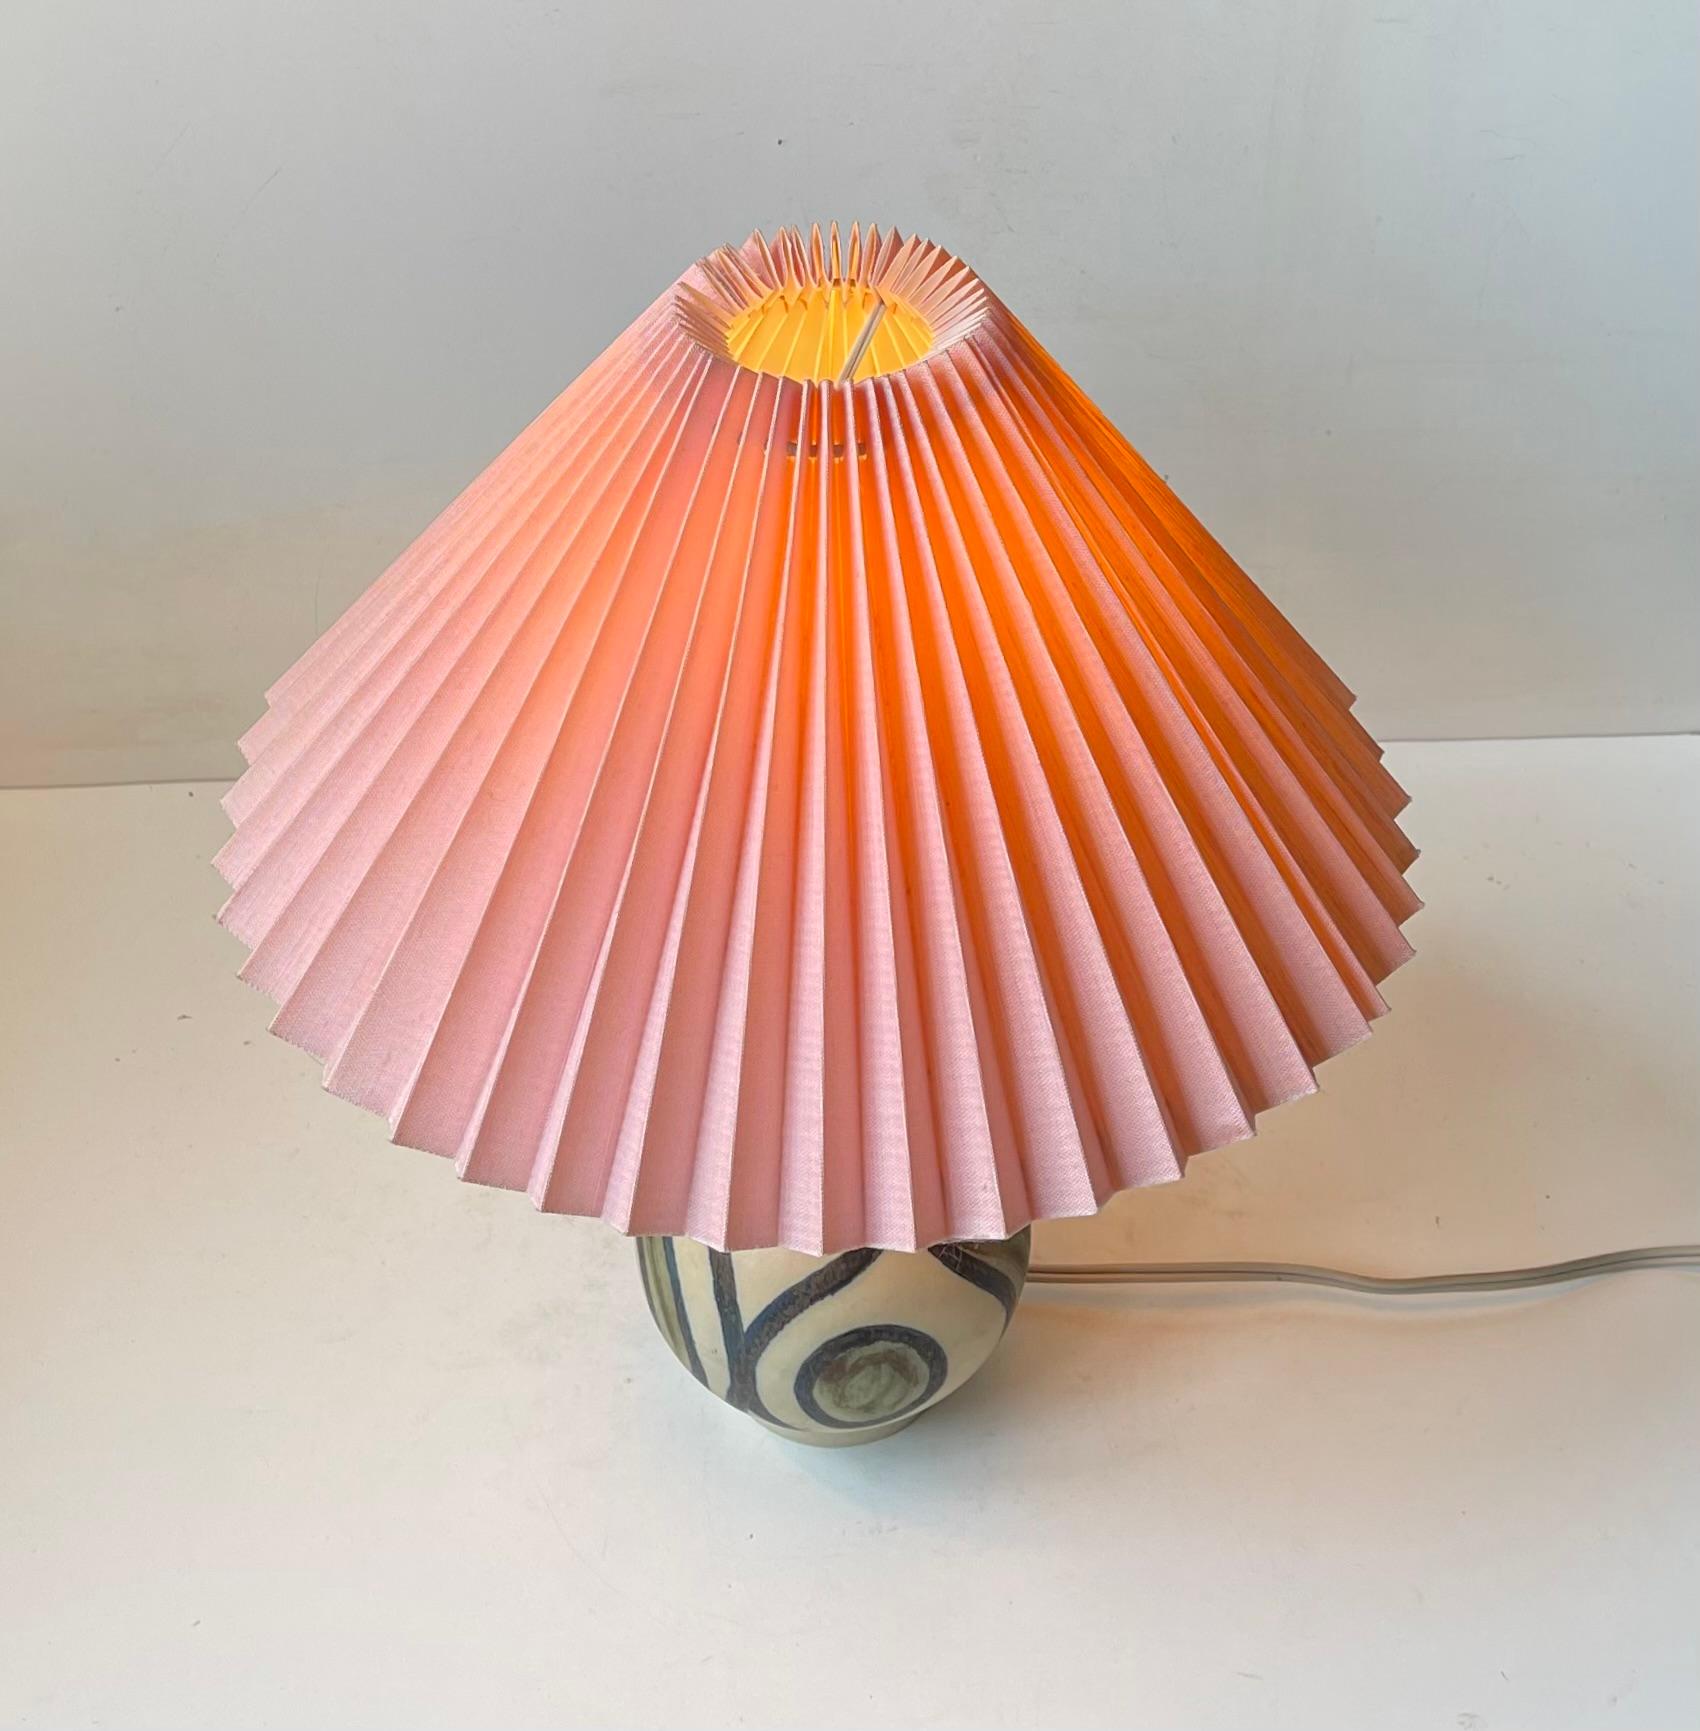 Late 20th Century Pink Shaded Scandinavian Modern Glazed Ceramic Table Lamp, 1970s For Sale